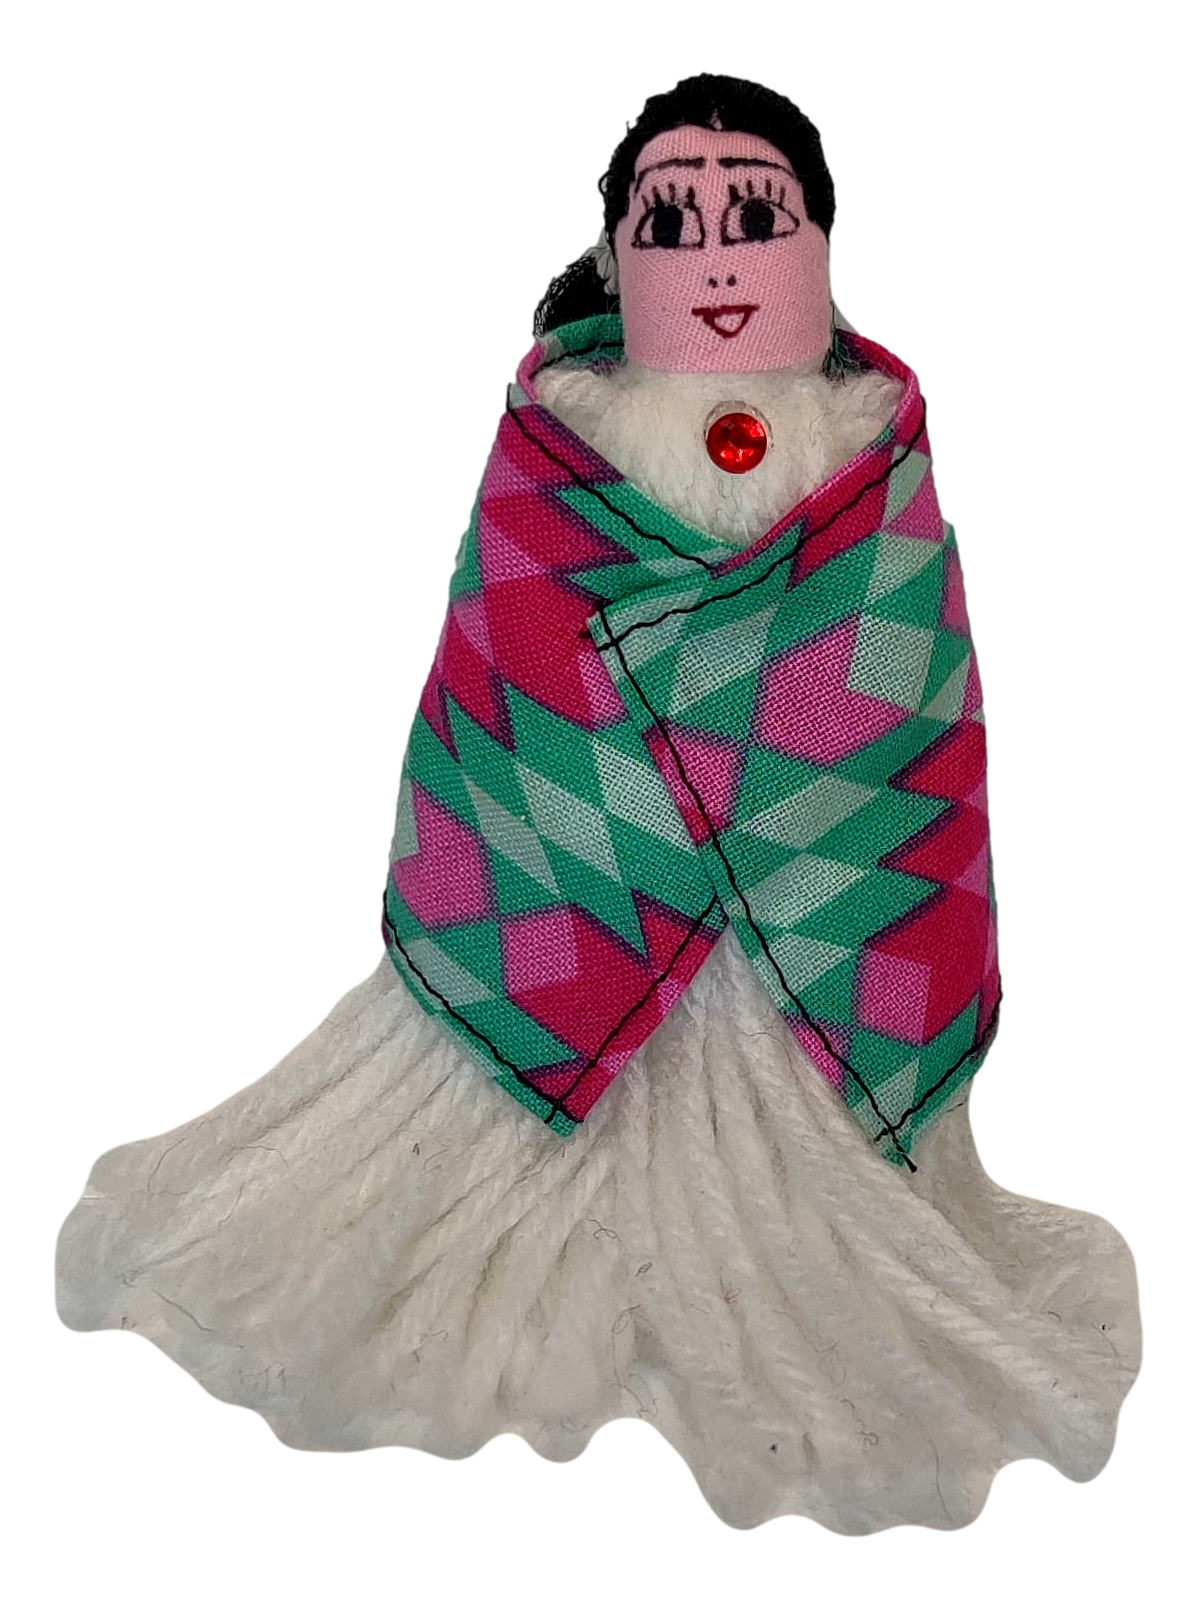 Toy Traditional Native American Dolls Handcrafted-15